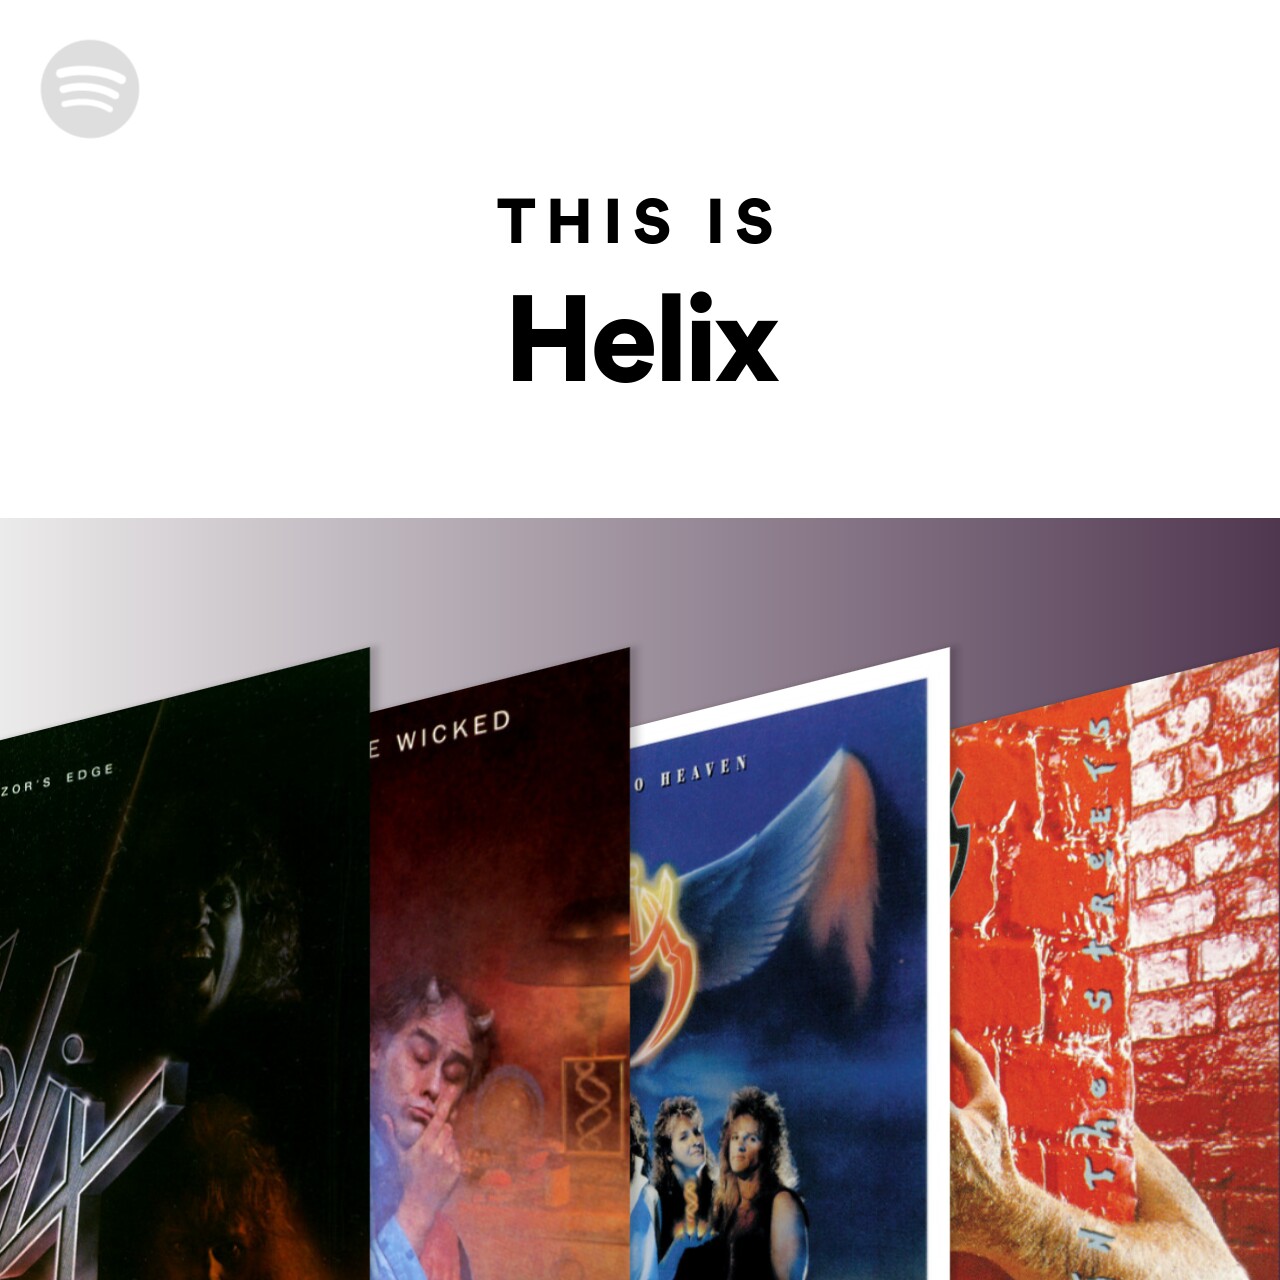 This Is Helix